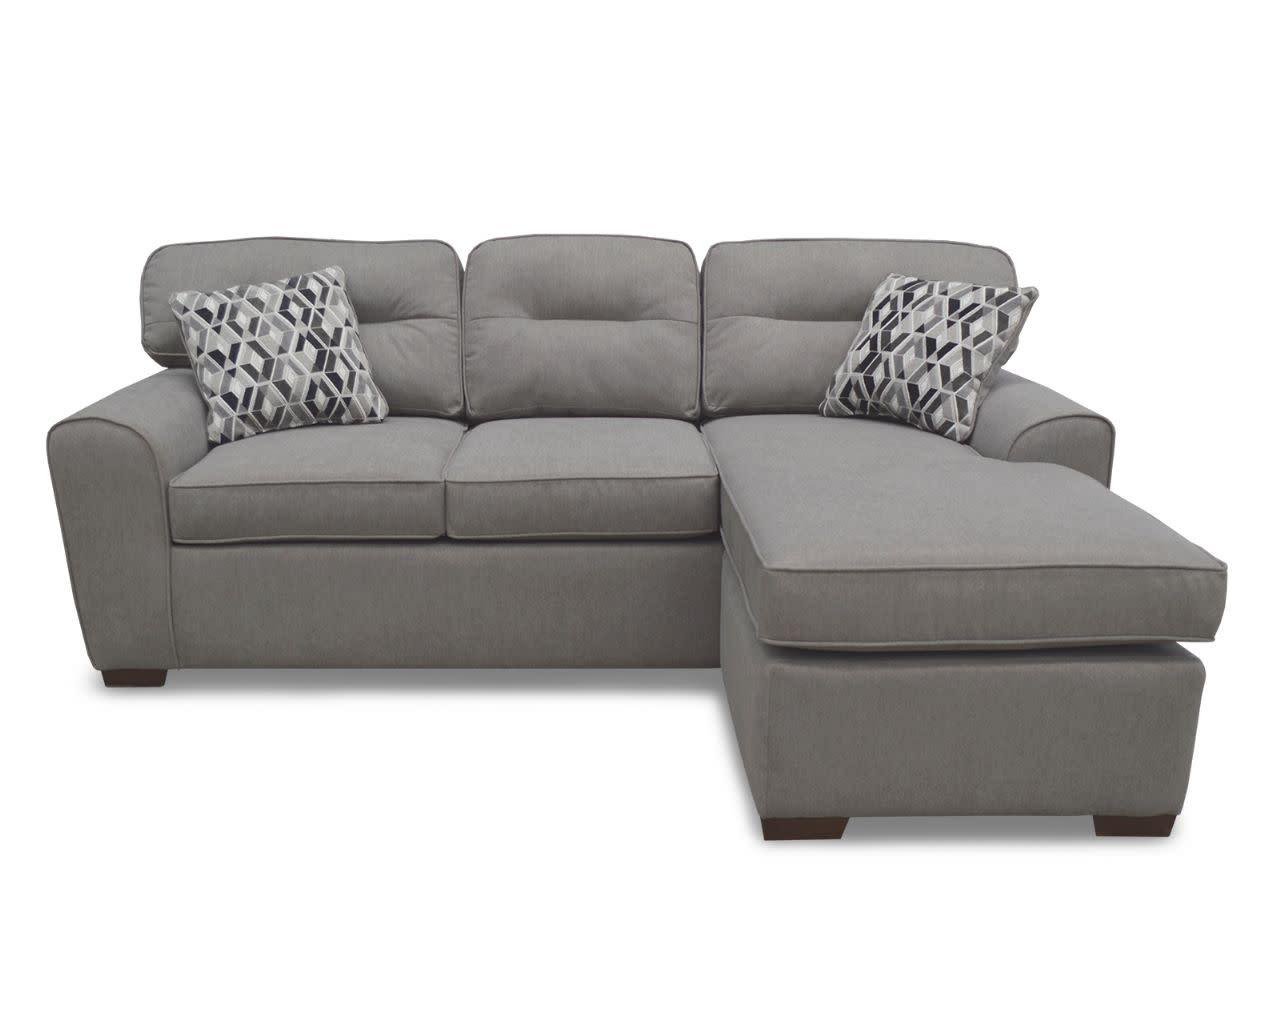 Chase Grey Sofa Chaise